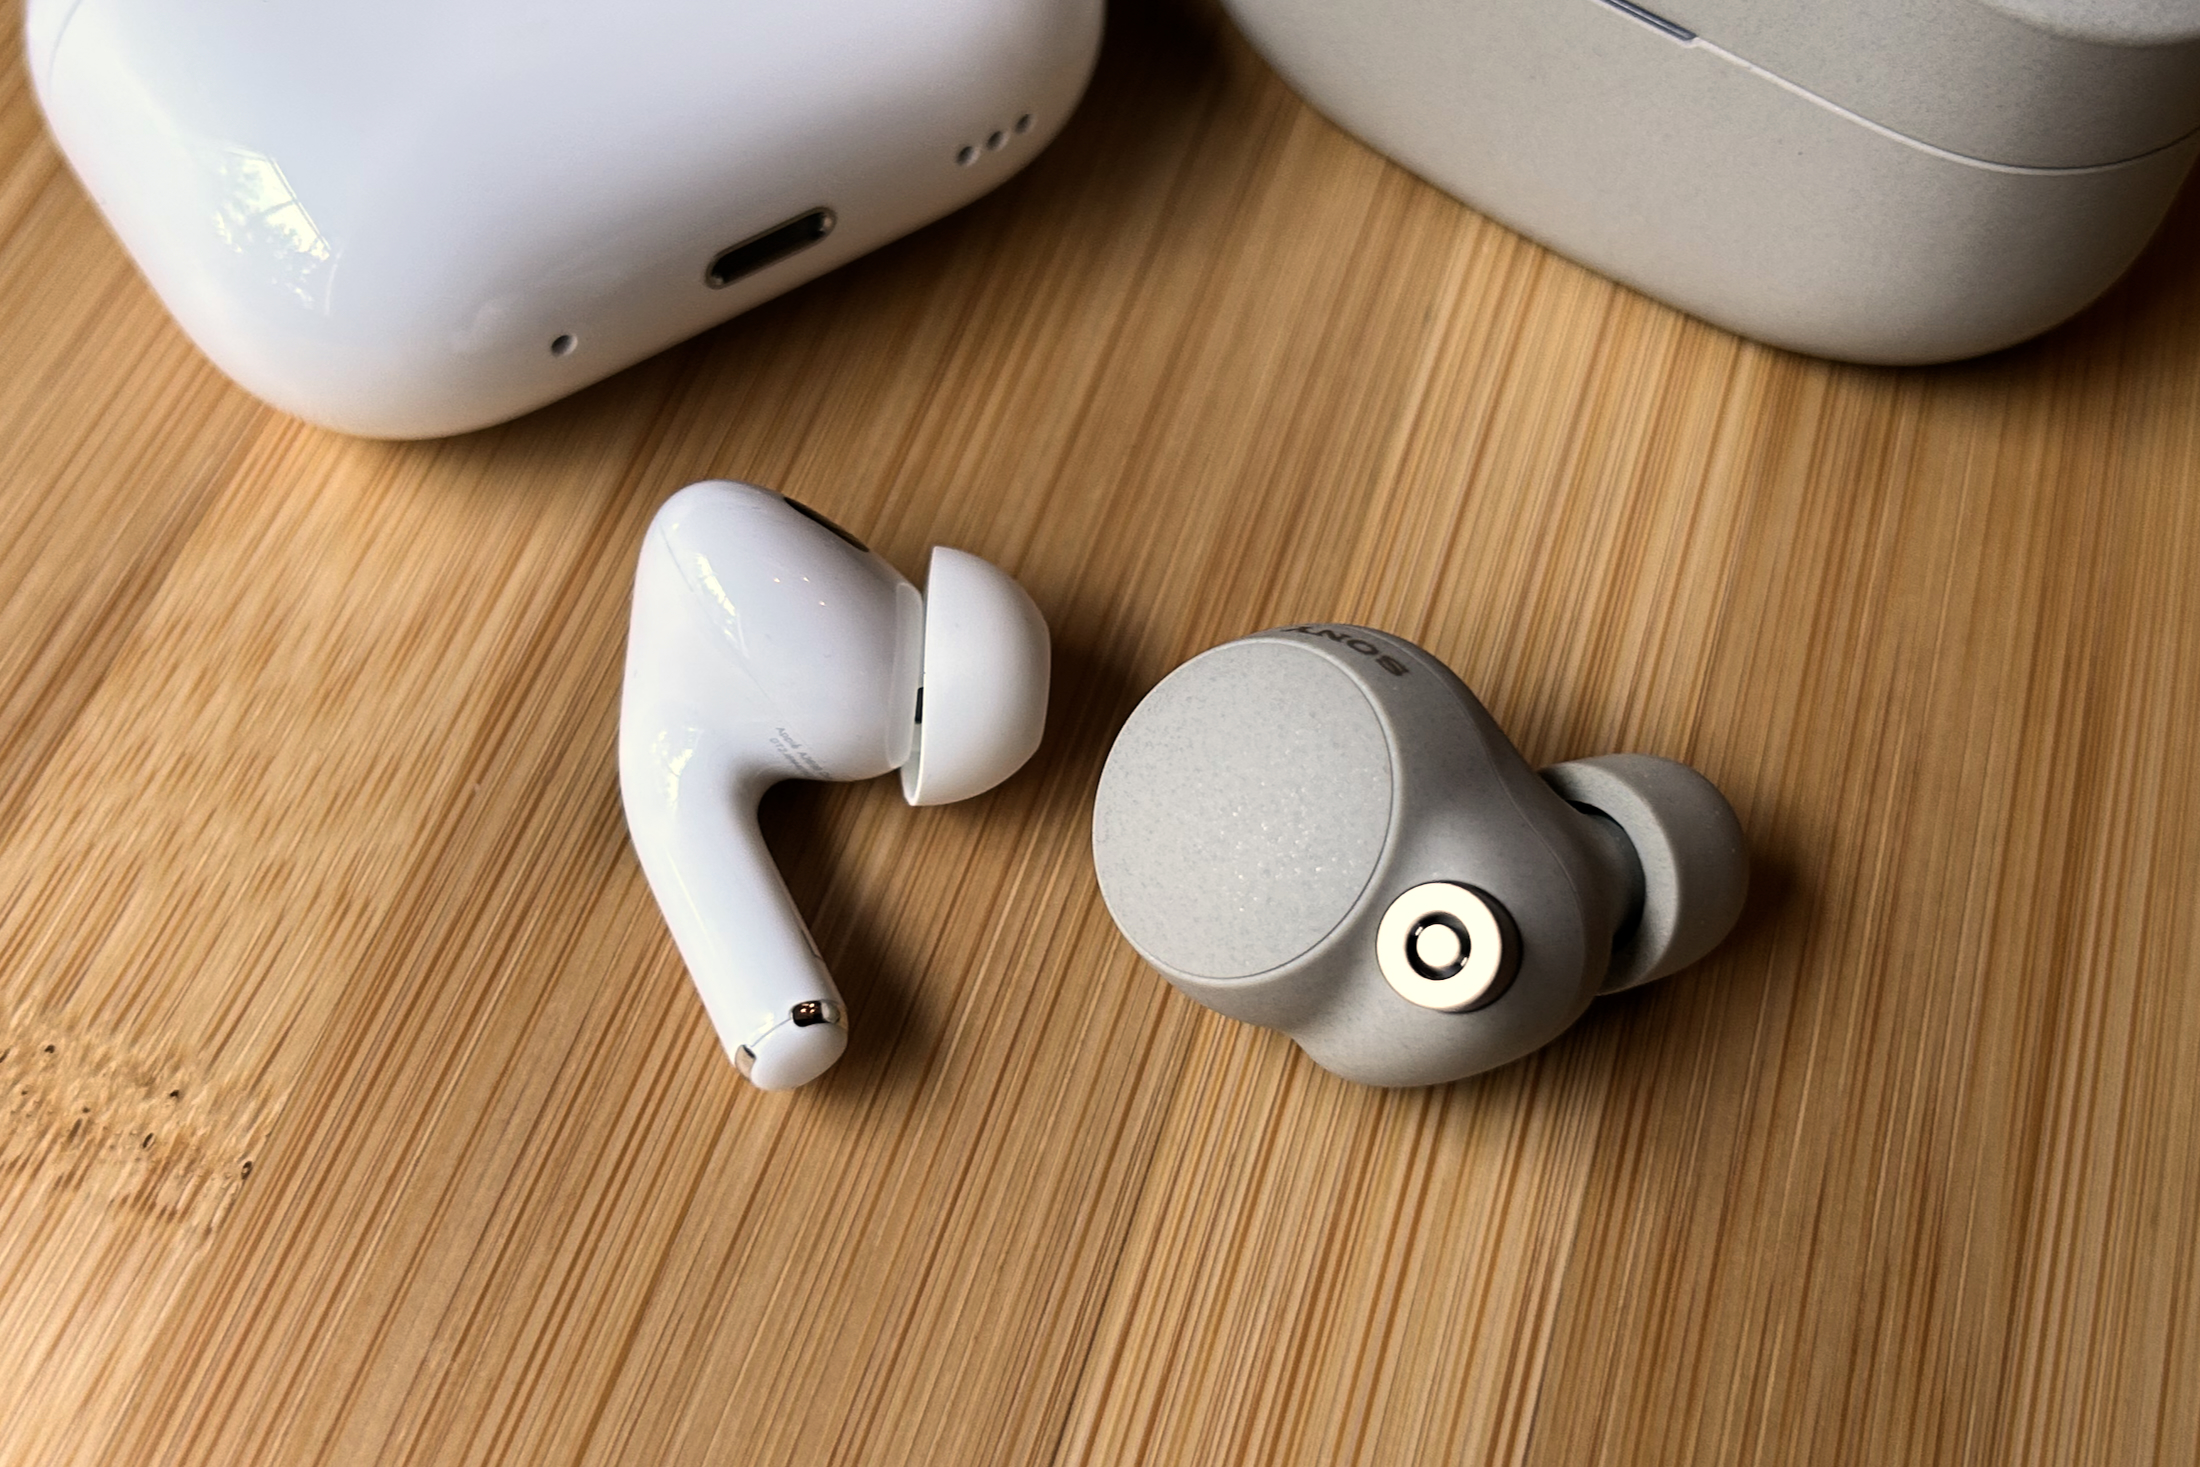 Apple AirPods 2 vs AirPods Pro: which Apple earbuds are better?